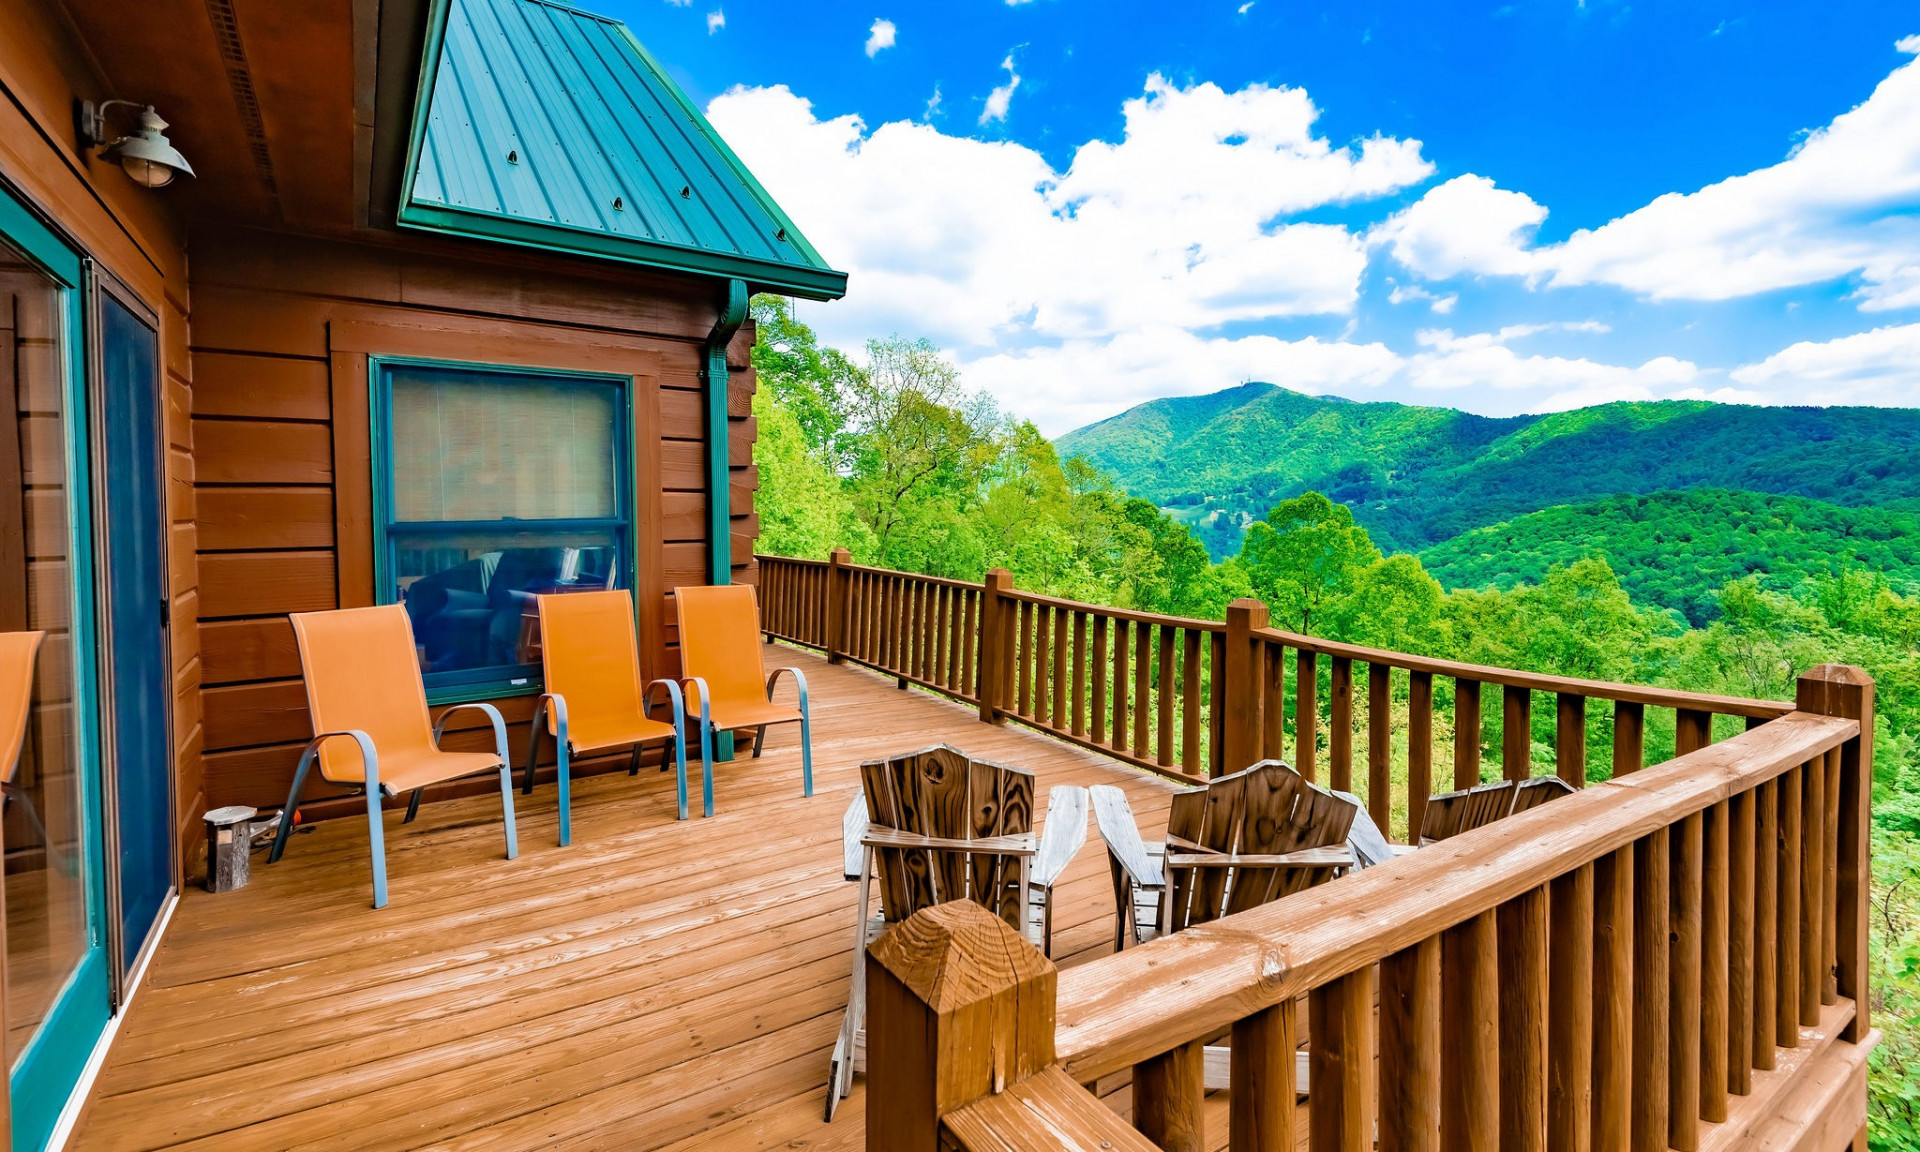 If you are looking for BIG views and privacy, this is the place!  This 3-bedroom, 2-bath log cabin is tucked back in a private wooded 13.7 acre setting off of Cameron Ridge Road in the Warrensville area of Ashe County, just minutes to West Jefferson.